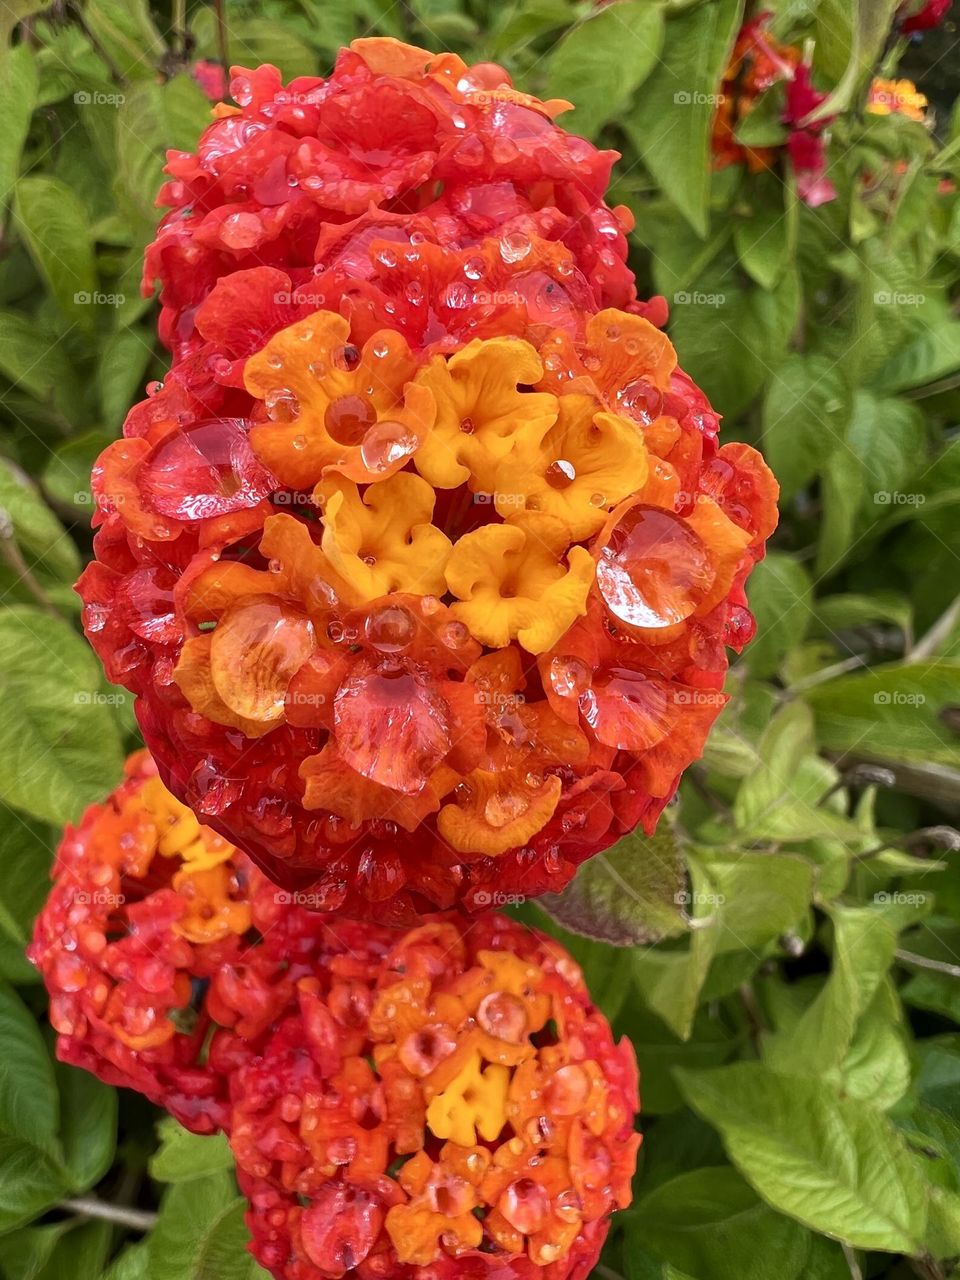 These bright and colorful flowers had just made it through a heavy rainstorm. The drops of water still sit perfectly on them as they wait for the sun to return. 